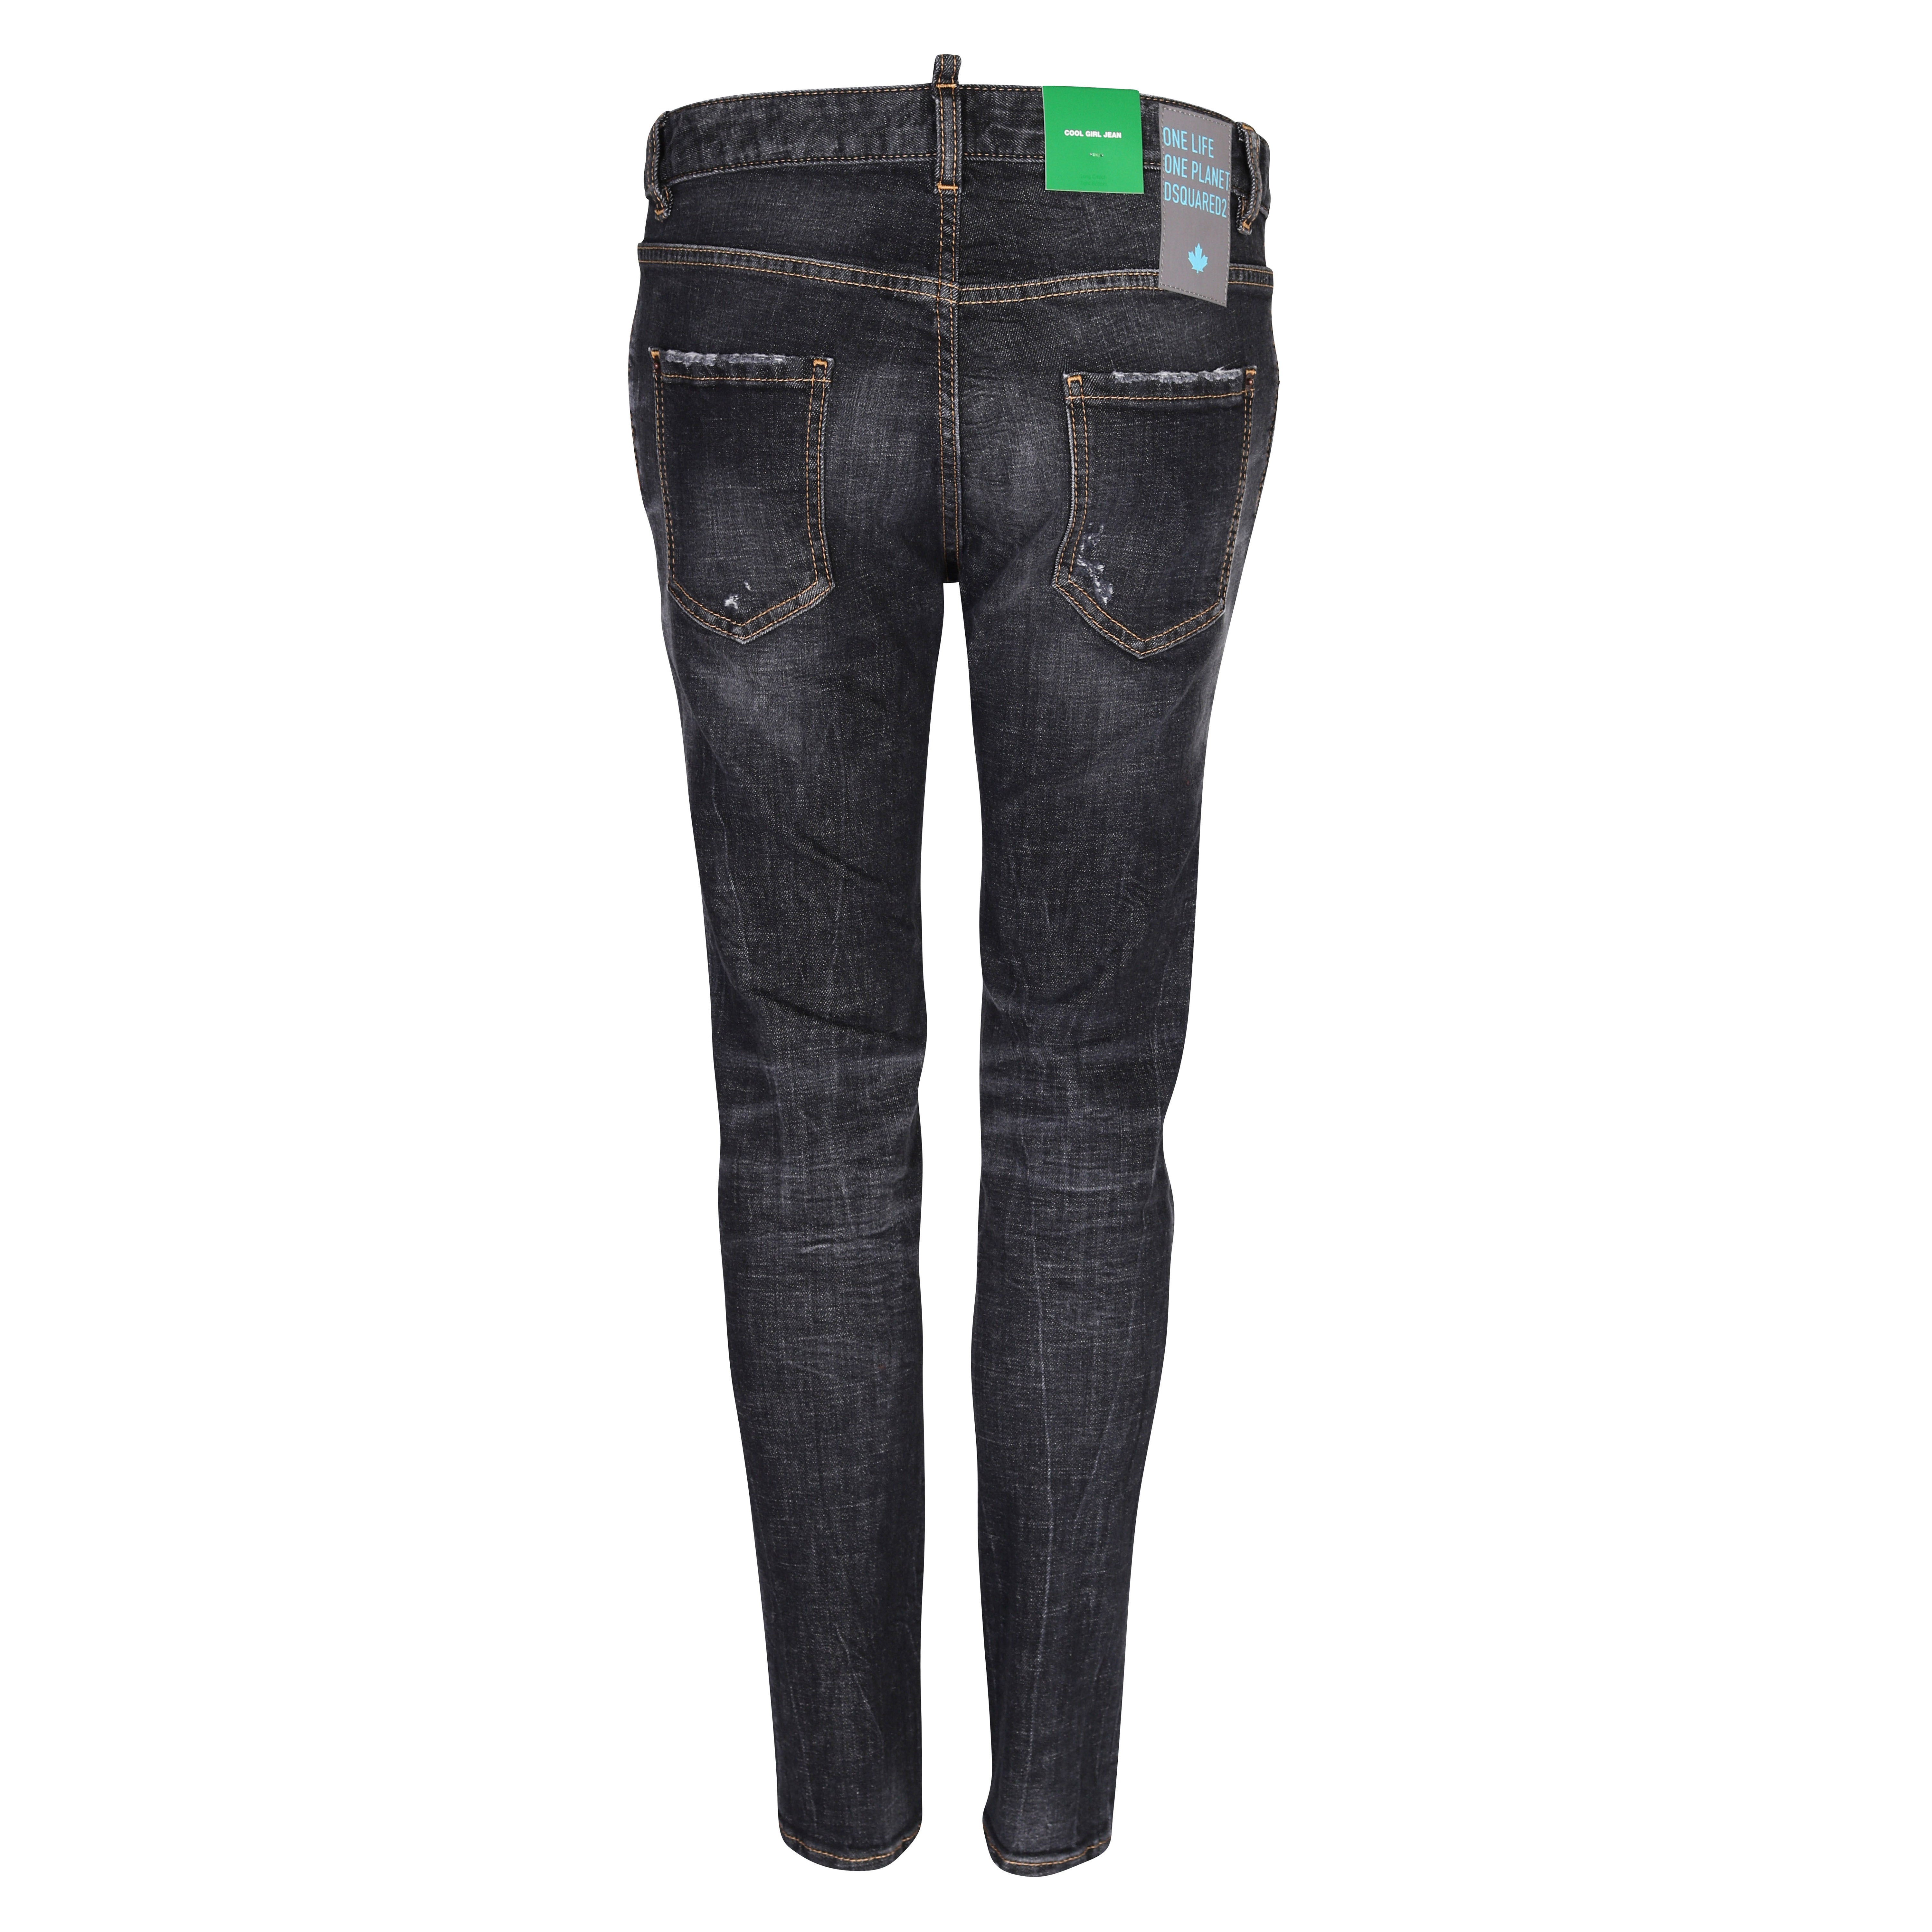 DSQUARED2 Green Label Cool Girl Jeans in Washed Black IT 36 / DE 30